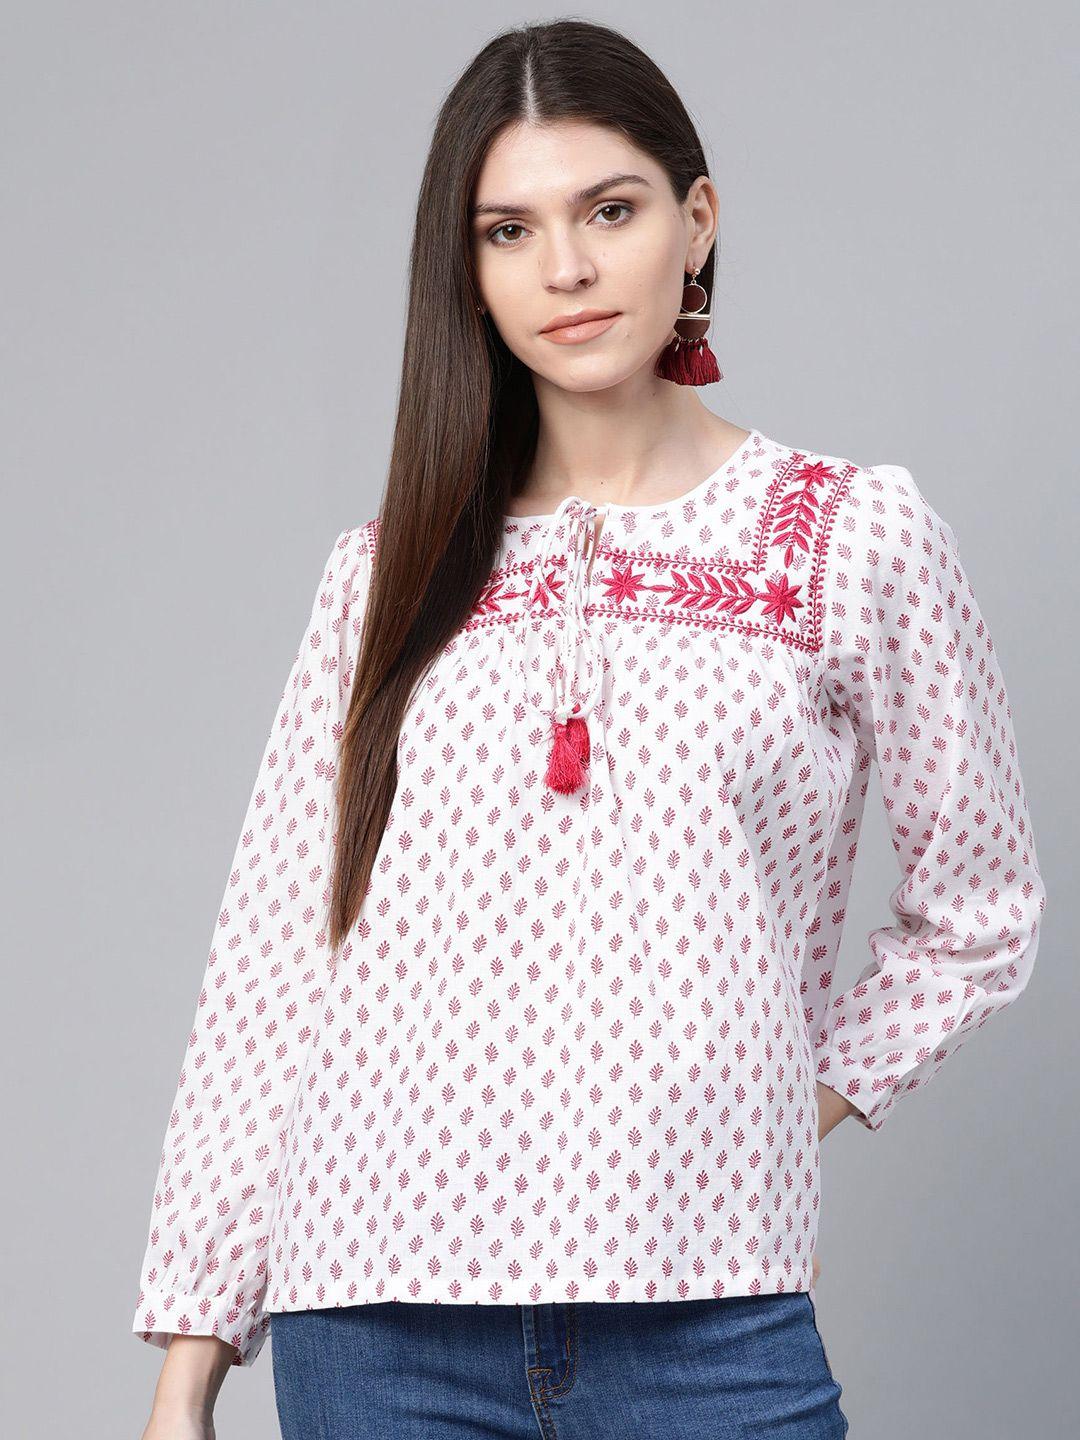 rangriti women white & pink embroidered ethnic printed top